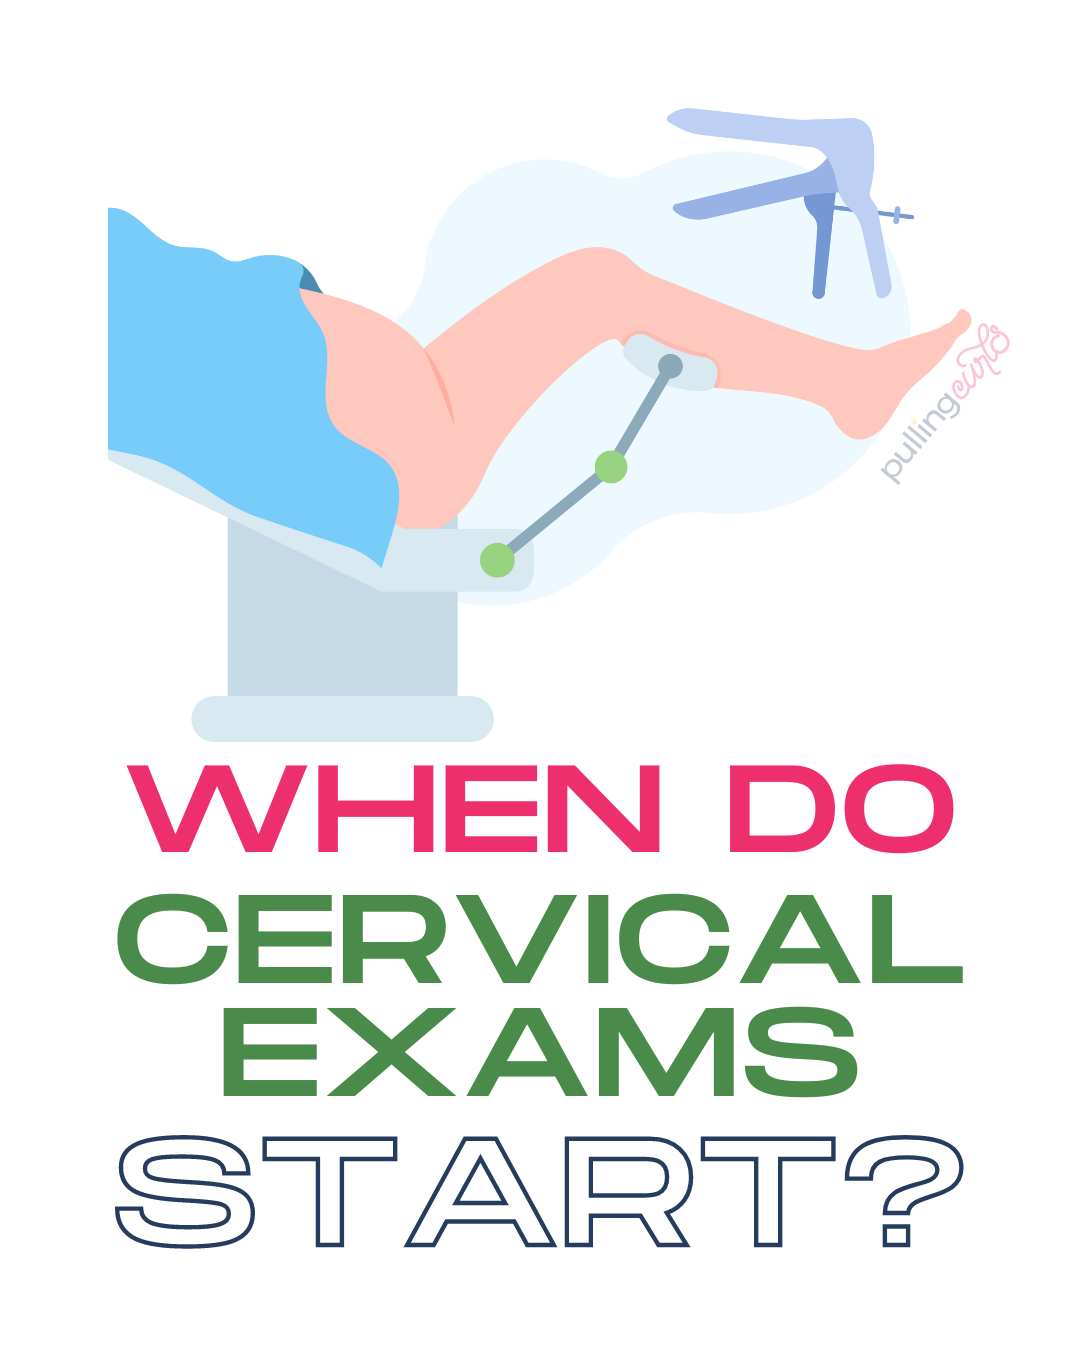 Dive into a comprehensive guide on the start of cervical checks. Helping women navigate their health journey, this pin provides a detailed timeline that elucidates when and why cervical screenings become a part of regular health checkups. Be empowered, informed, and in control of your health. via @pullingcurls